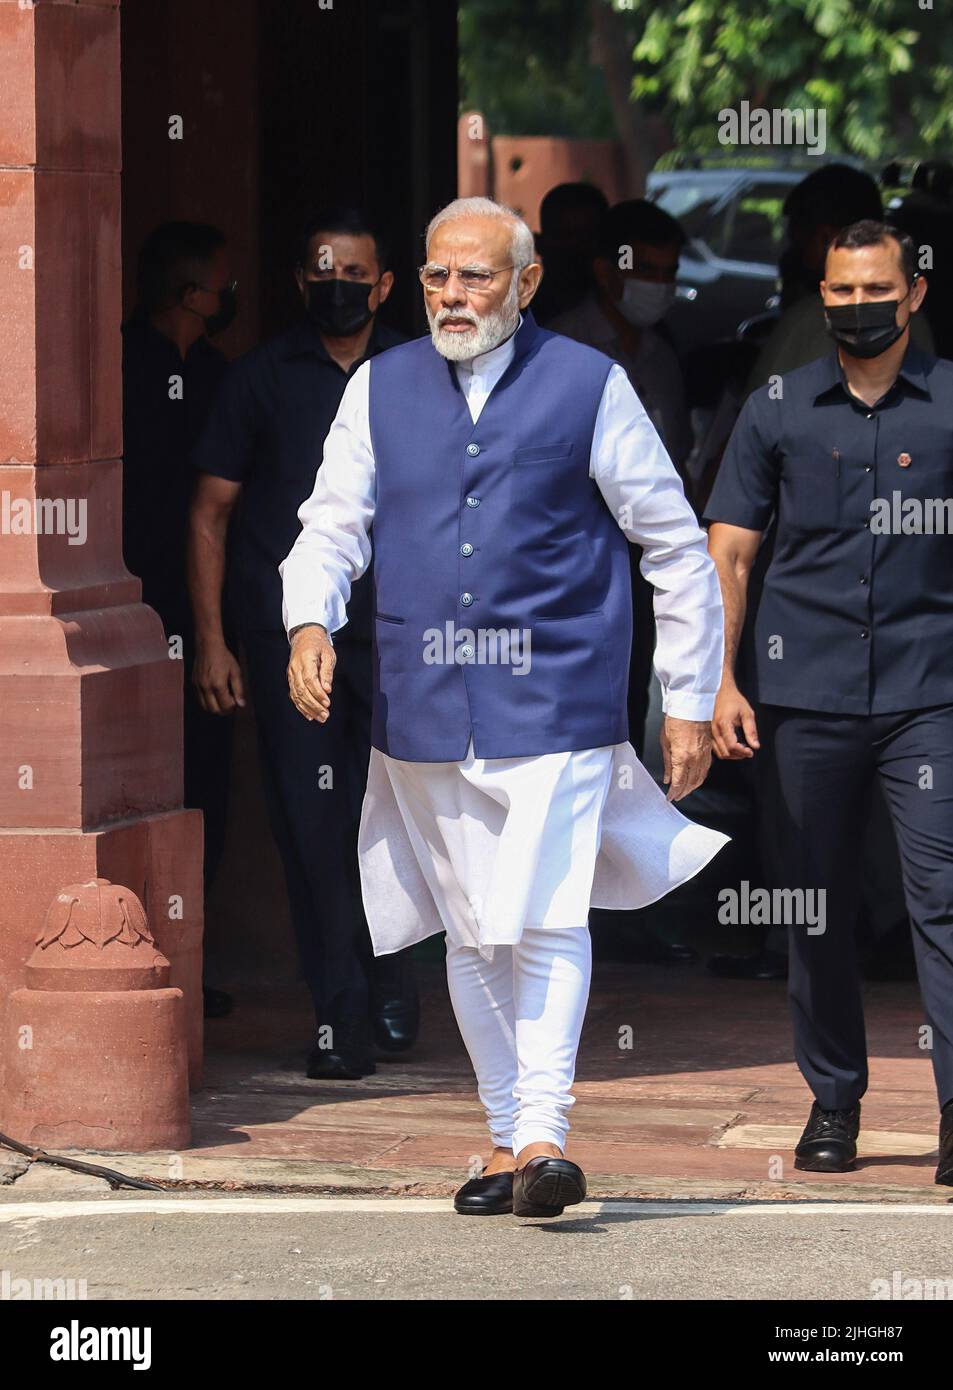 New Delhi, India. 18th July, 2022. India's prime minister Narendra Modi, arrives for the opening day of the Monsoon session at Parliament House. (Photo by Ganesh Chandra/SOPA Images/Sipa USA) Credit: Sipa USA/Alamy Live News Stock Photo